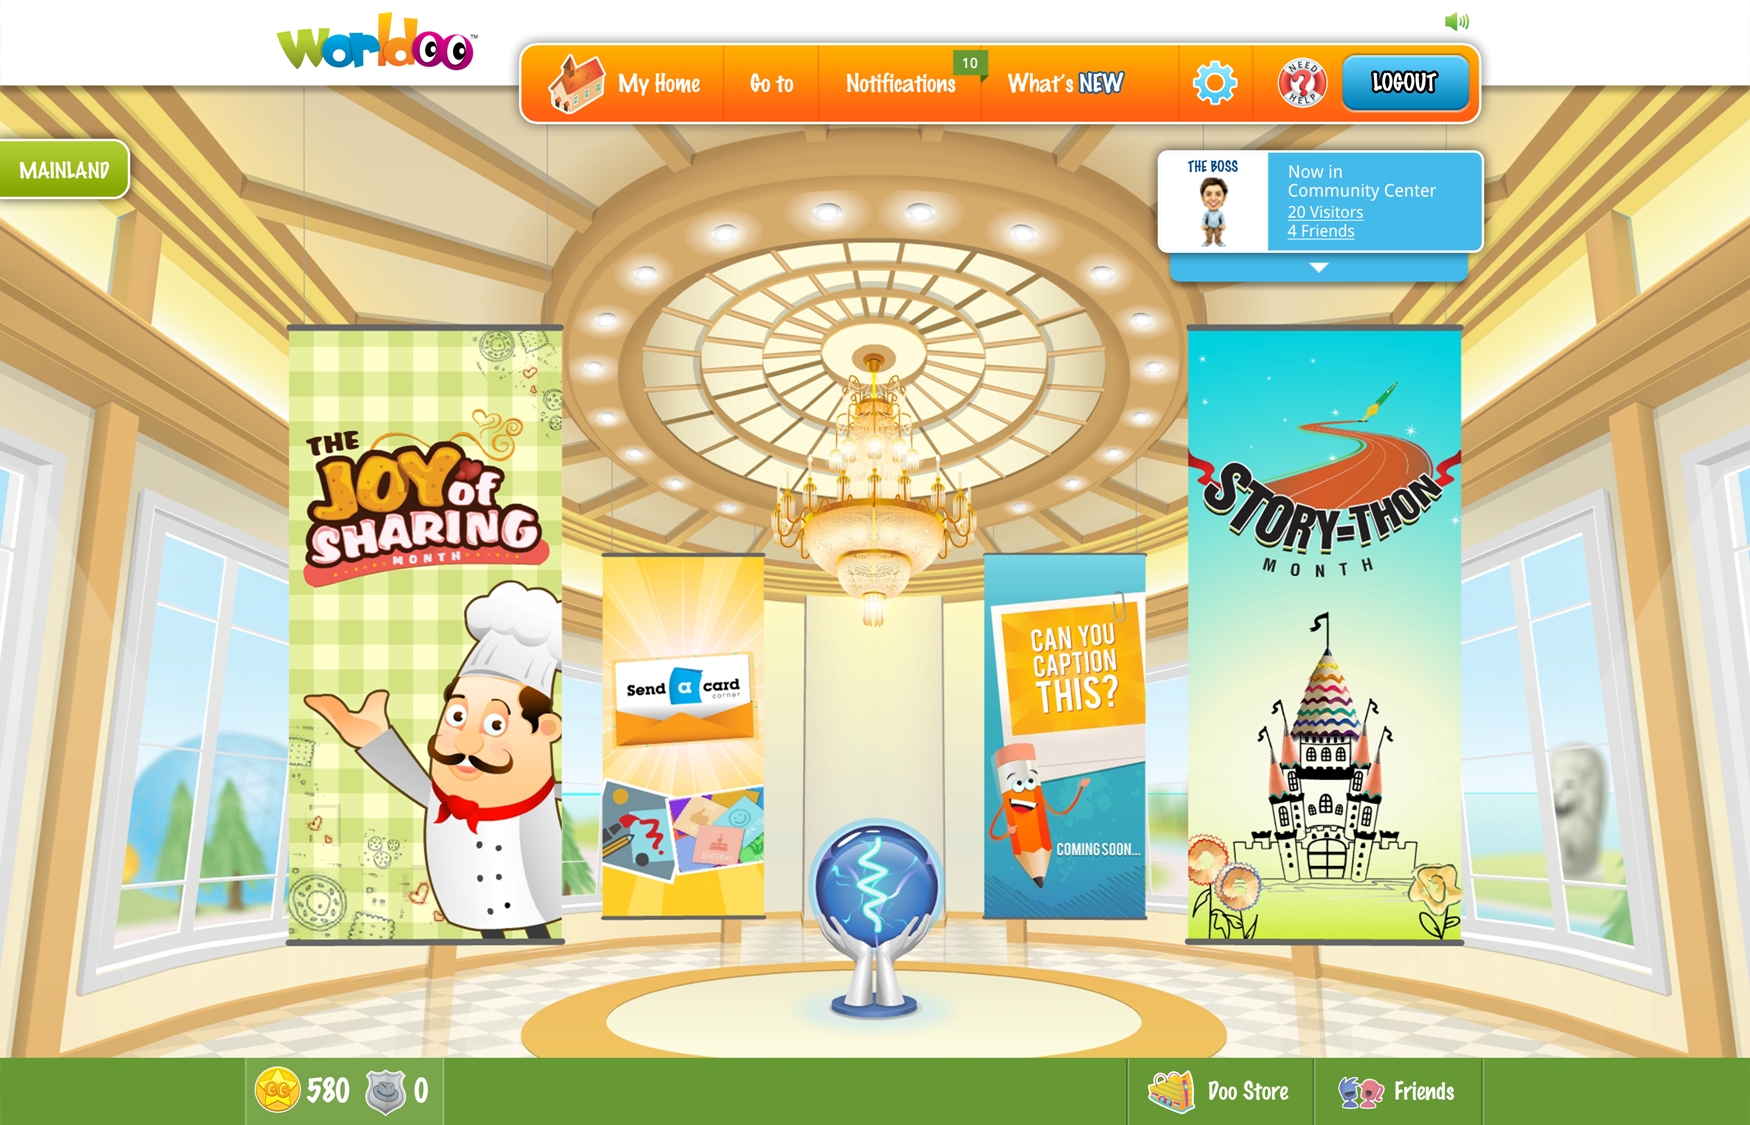 Worldoo.com - A virtual ecosystem where the child can live, express and play!